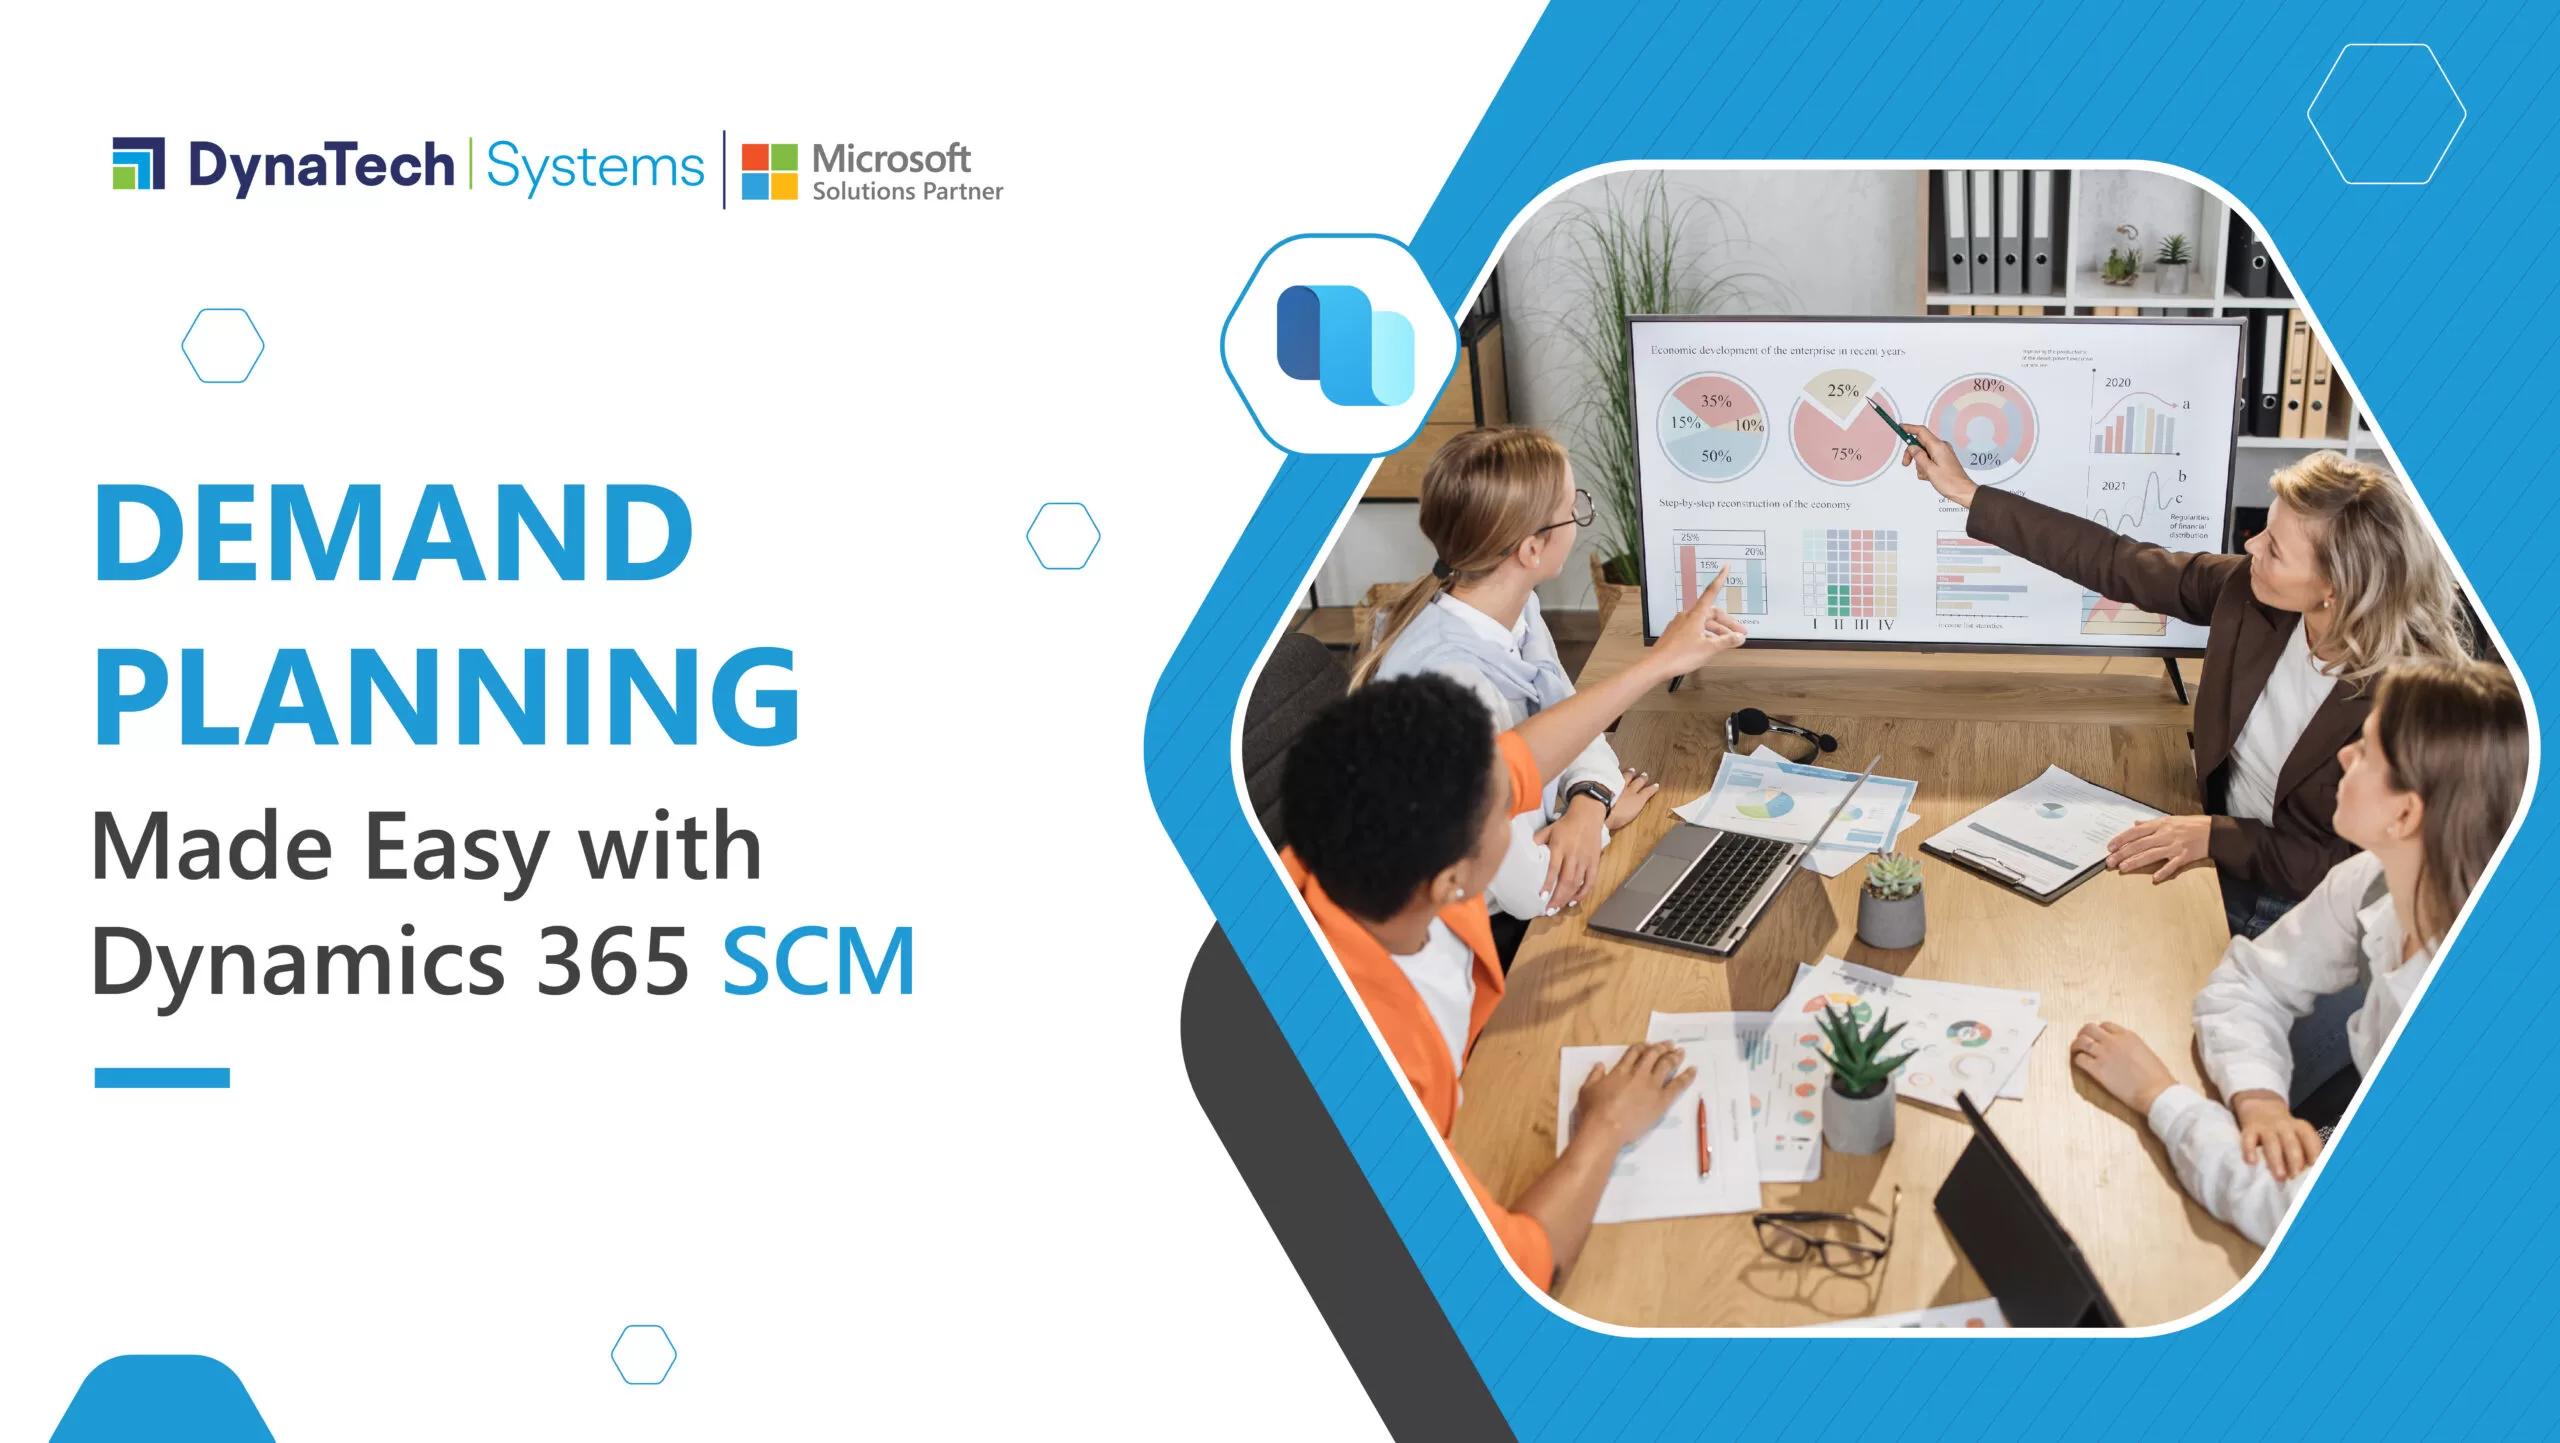 Demand Planning Made Easy with Dynamics 365 SCM